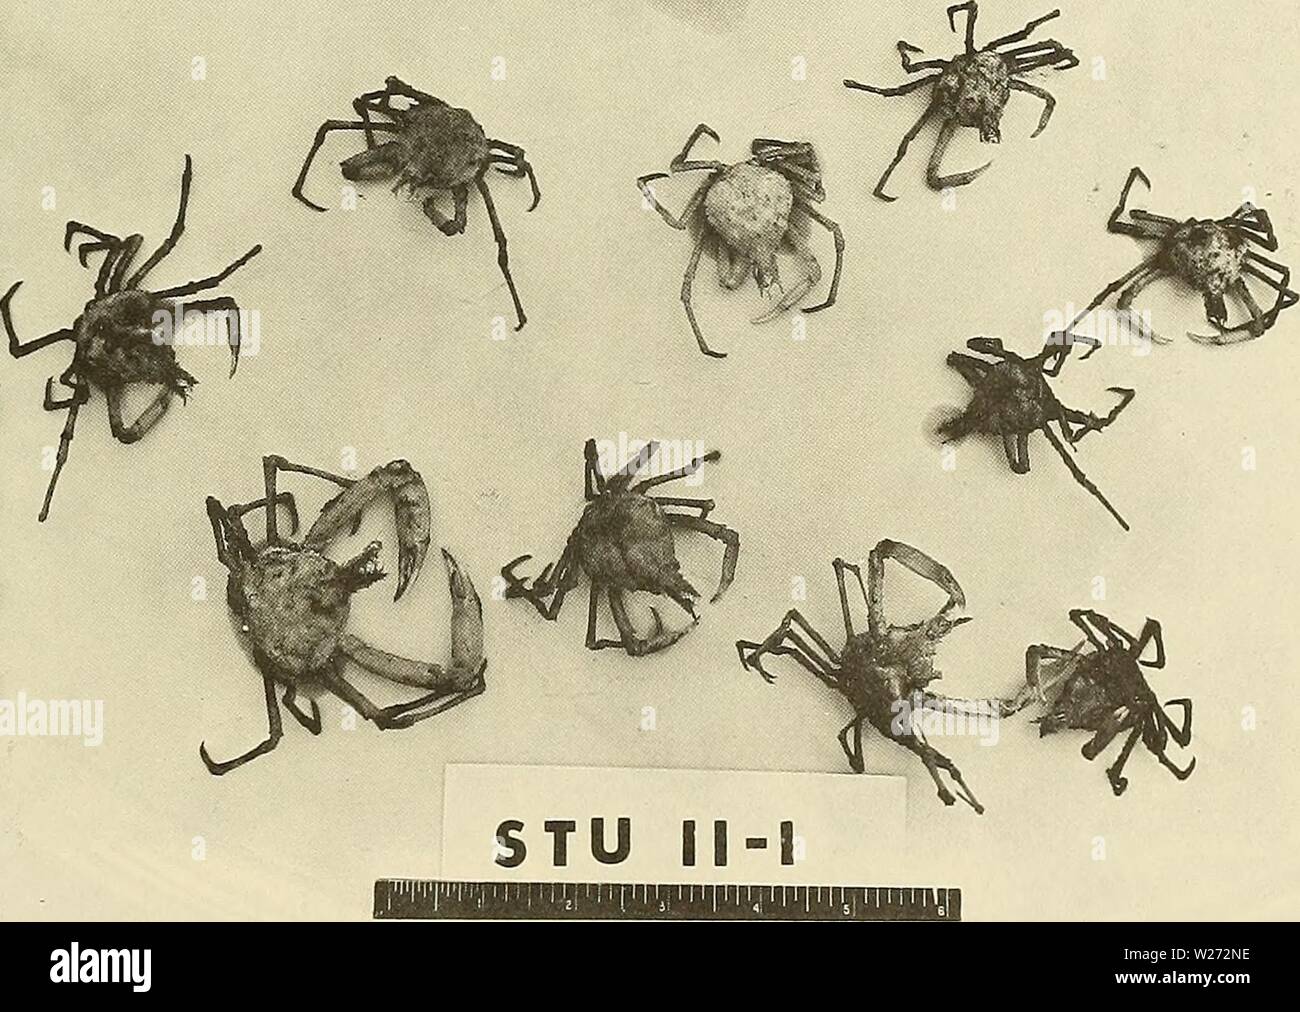 Archive image from page 34 of Deep-ocean biodeterioration of materials (1965). Deep-ocean biodeterioration of materials  deepoceanbiodete02mura Year: 1965  Figure B-7. Amphipods found on STU test specimens.    Figure B-8. Deep-sea crabs found crawling over STU test specimens. 31 Stock Photo